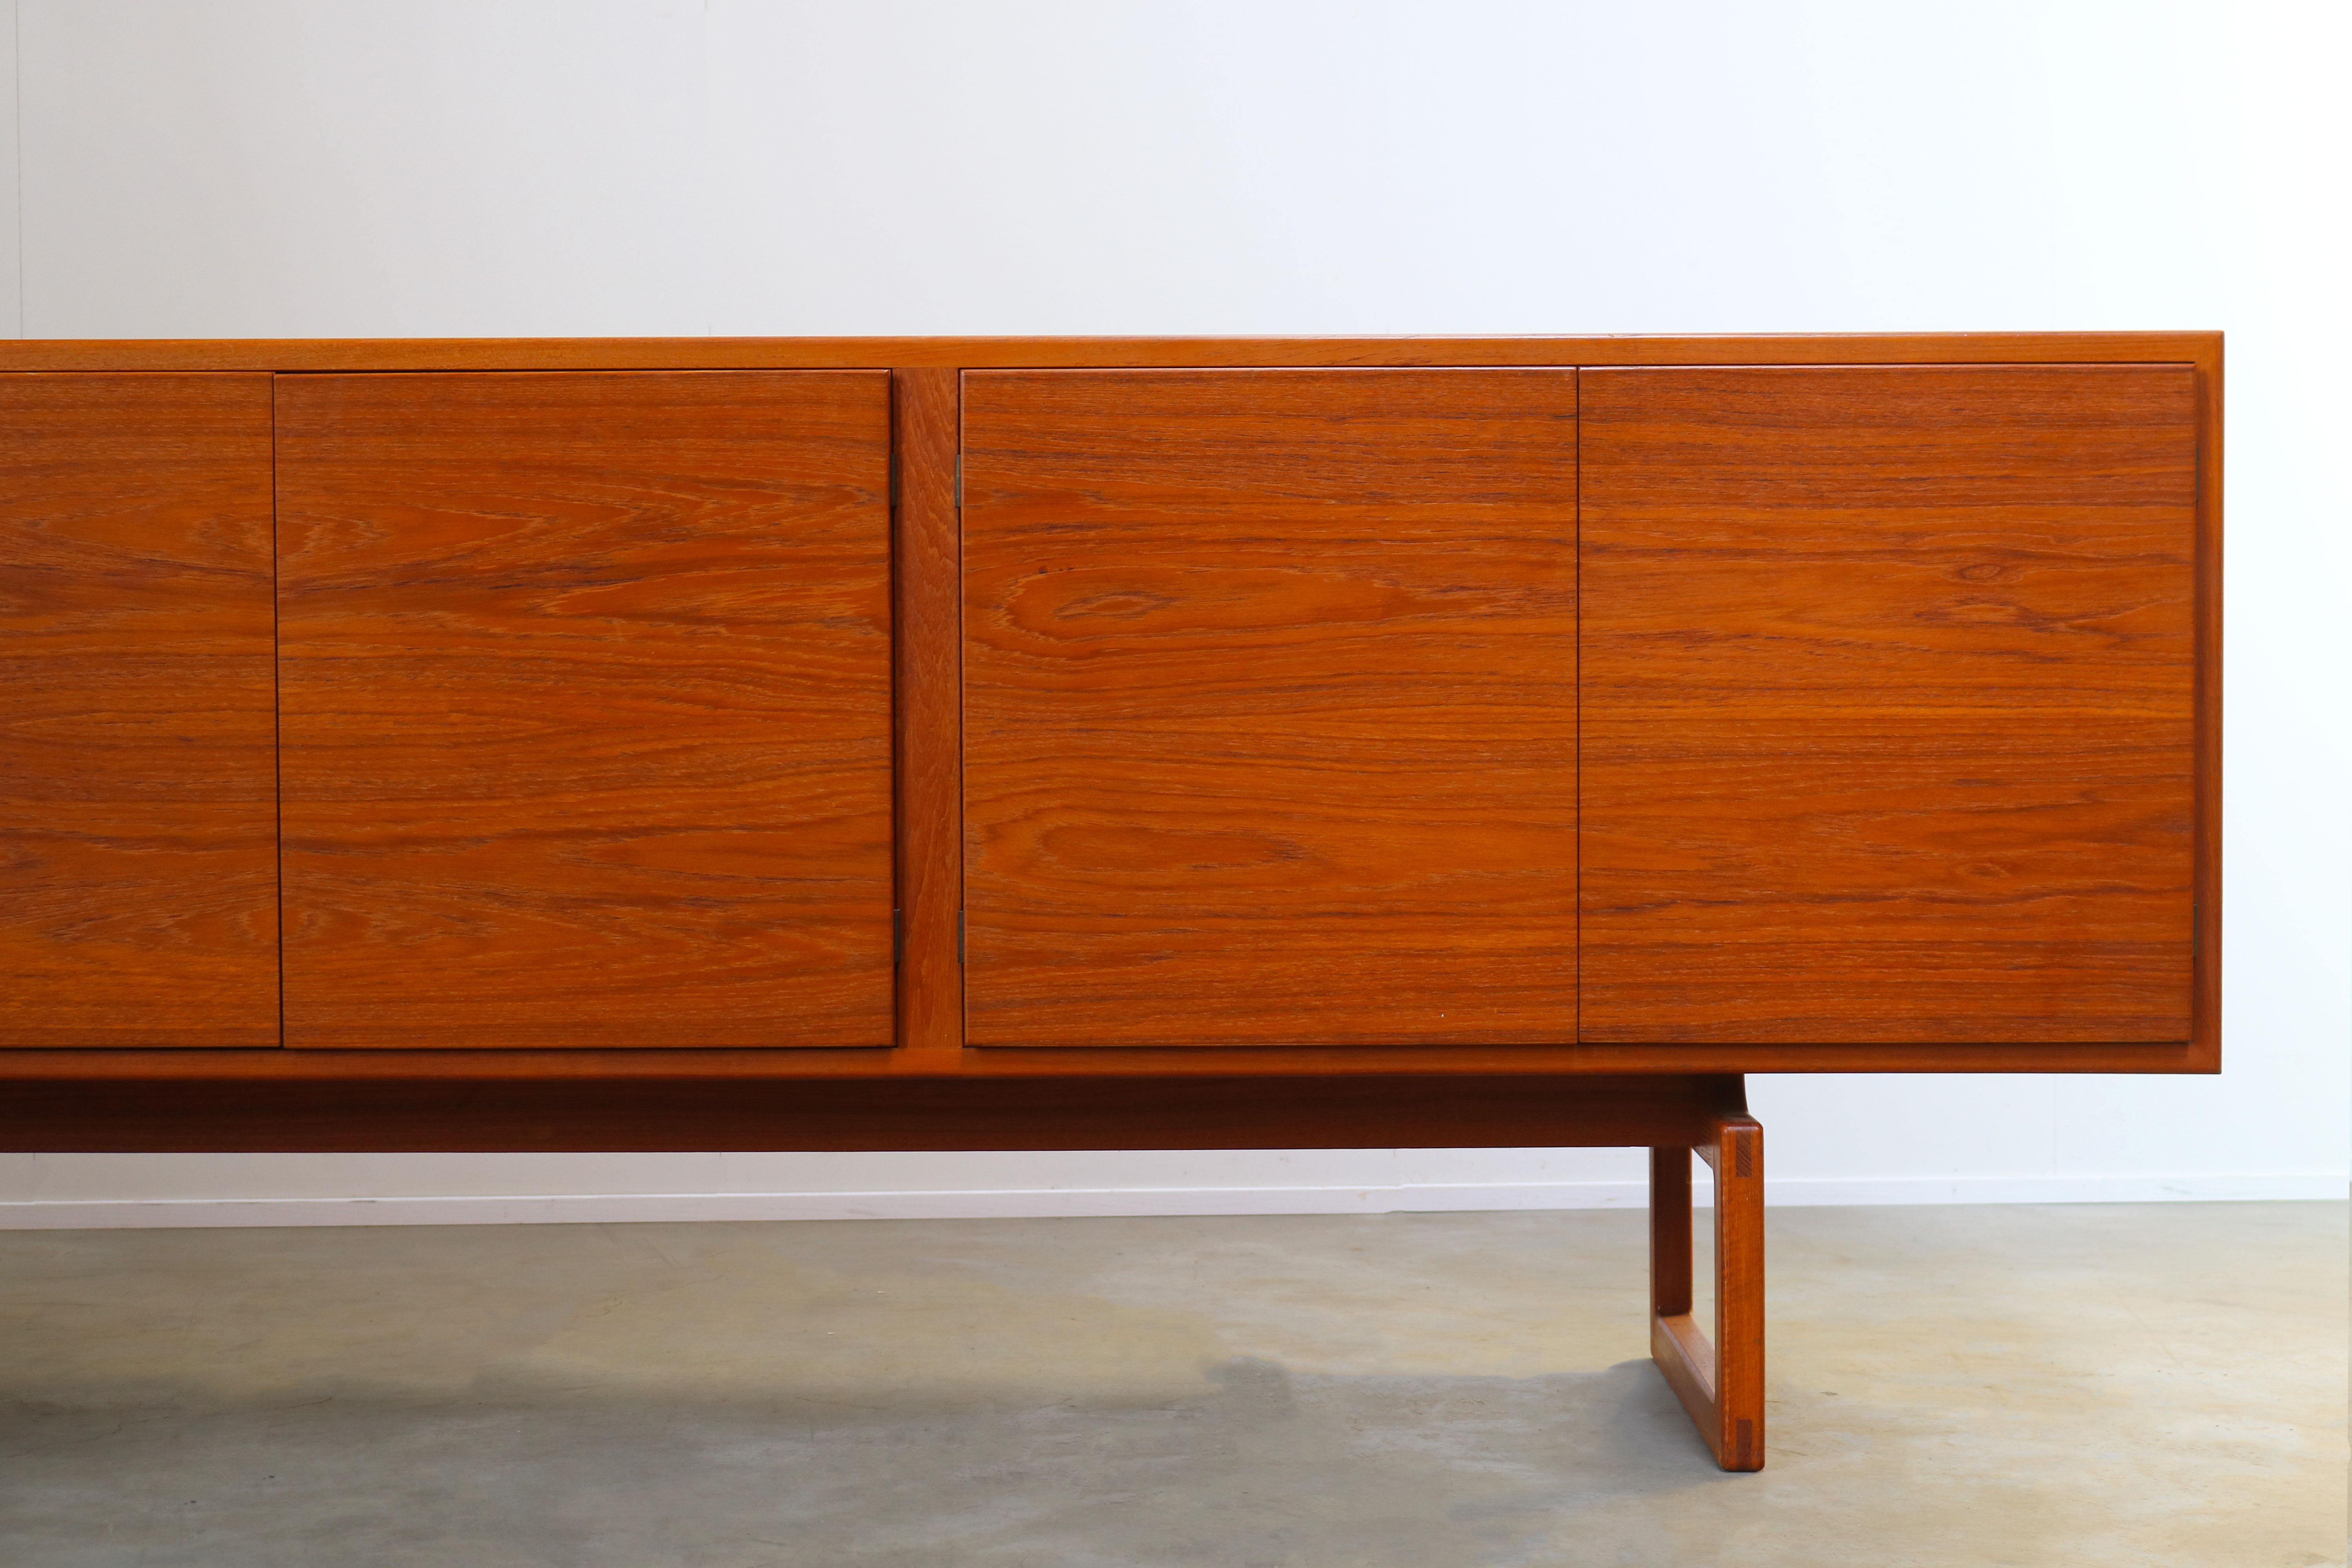 Rare Danish sideboard / credenza model: MK511 designed by Arne Hovmand Olsen for Mogens Kold. Gorgeous Minimalist modernist design in solid teak. The entire front of the cabinet is made from a single piece of teak wich results in gorgeous woodgrain